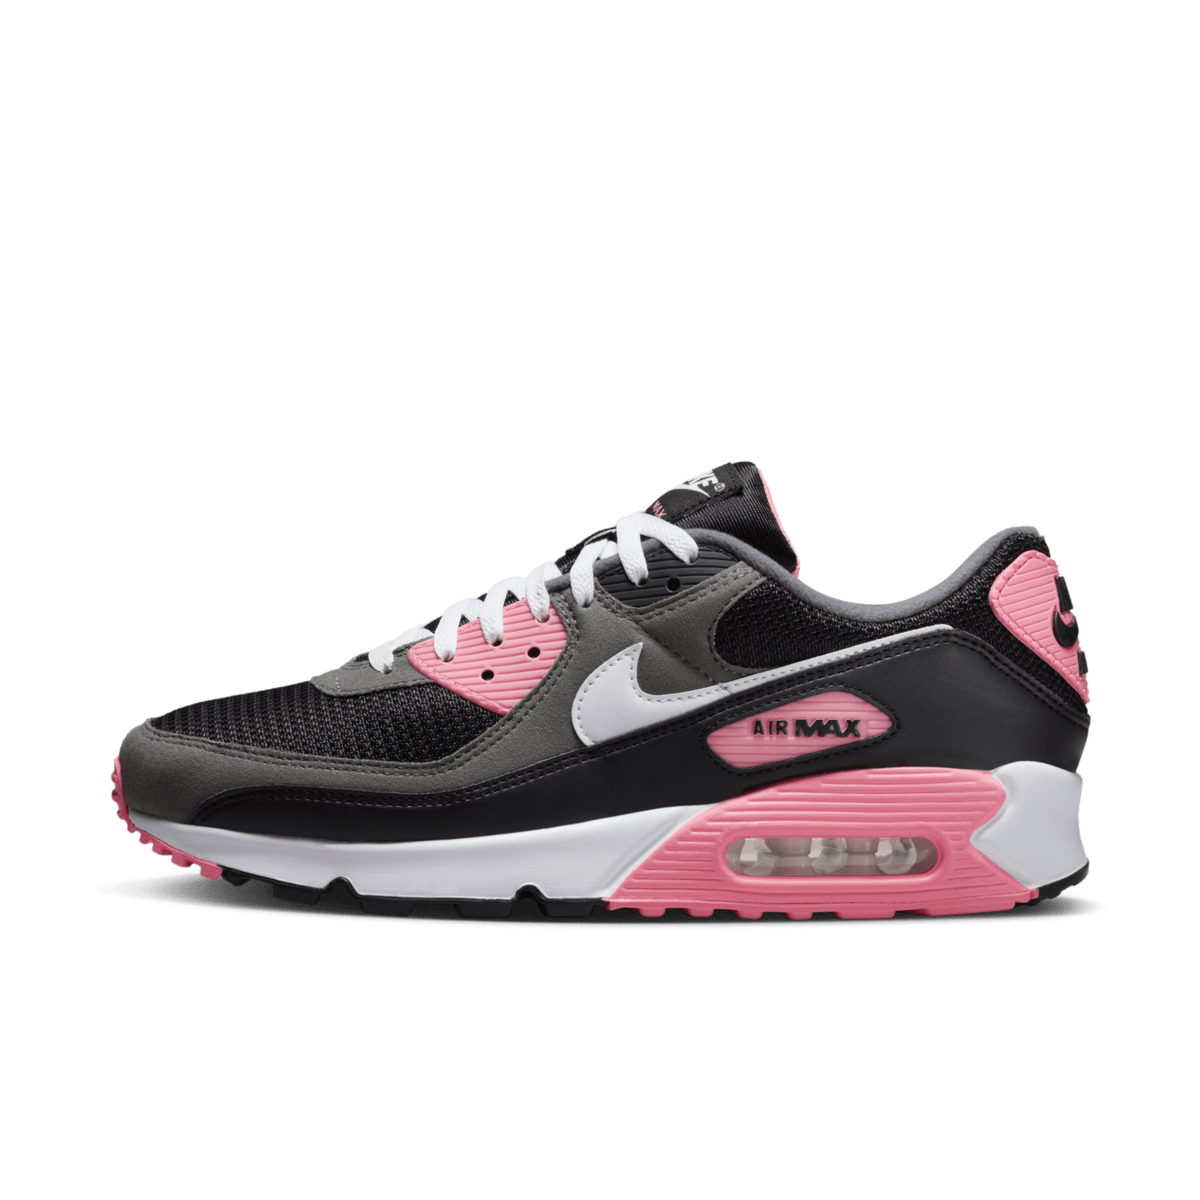 Available Now: The Nike Air Max 90 Futura You Deserve Flowers